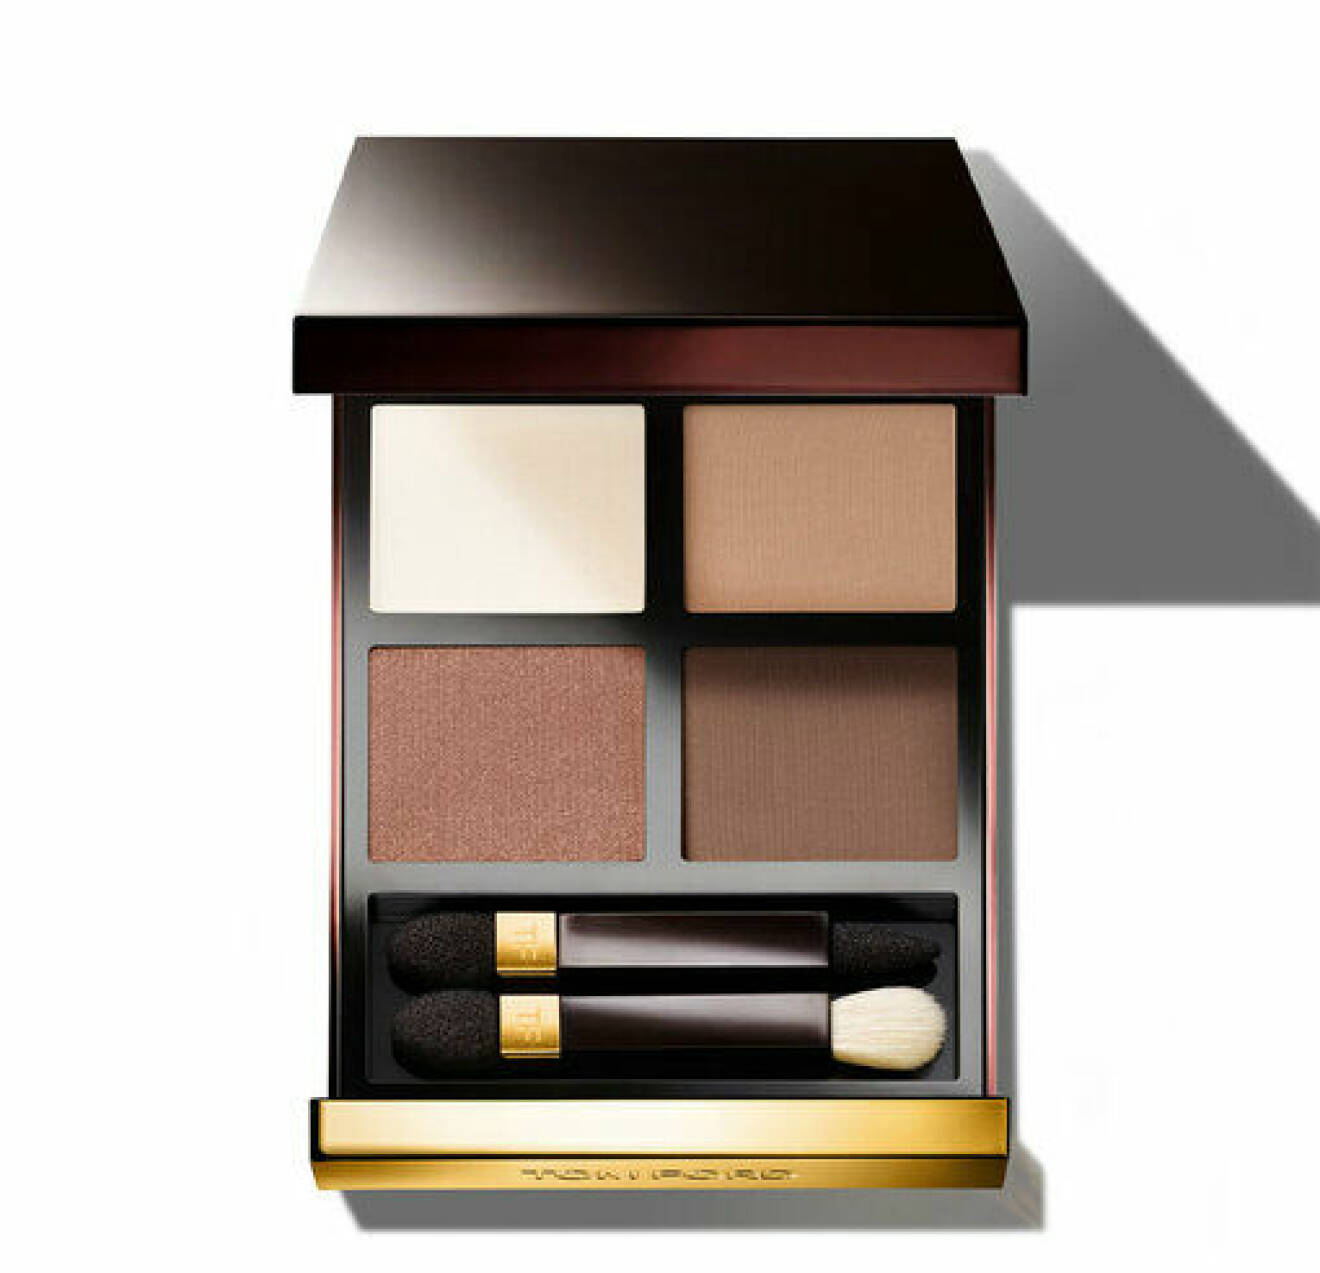 Tom Fords Cocoa mirage palette